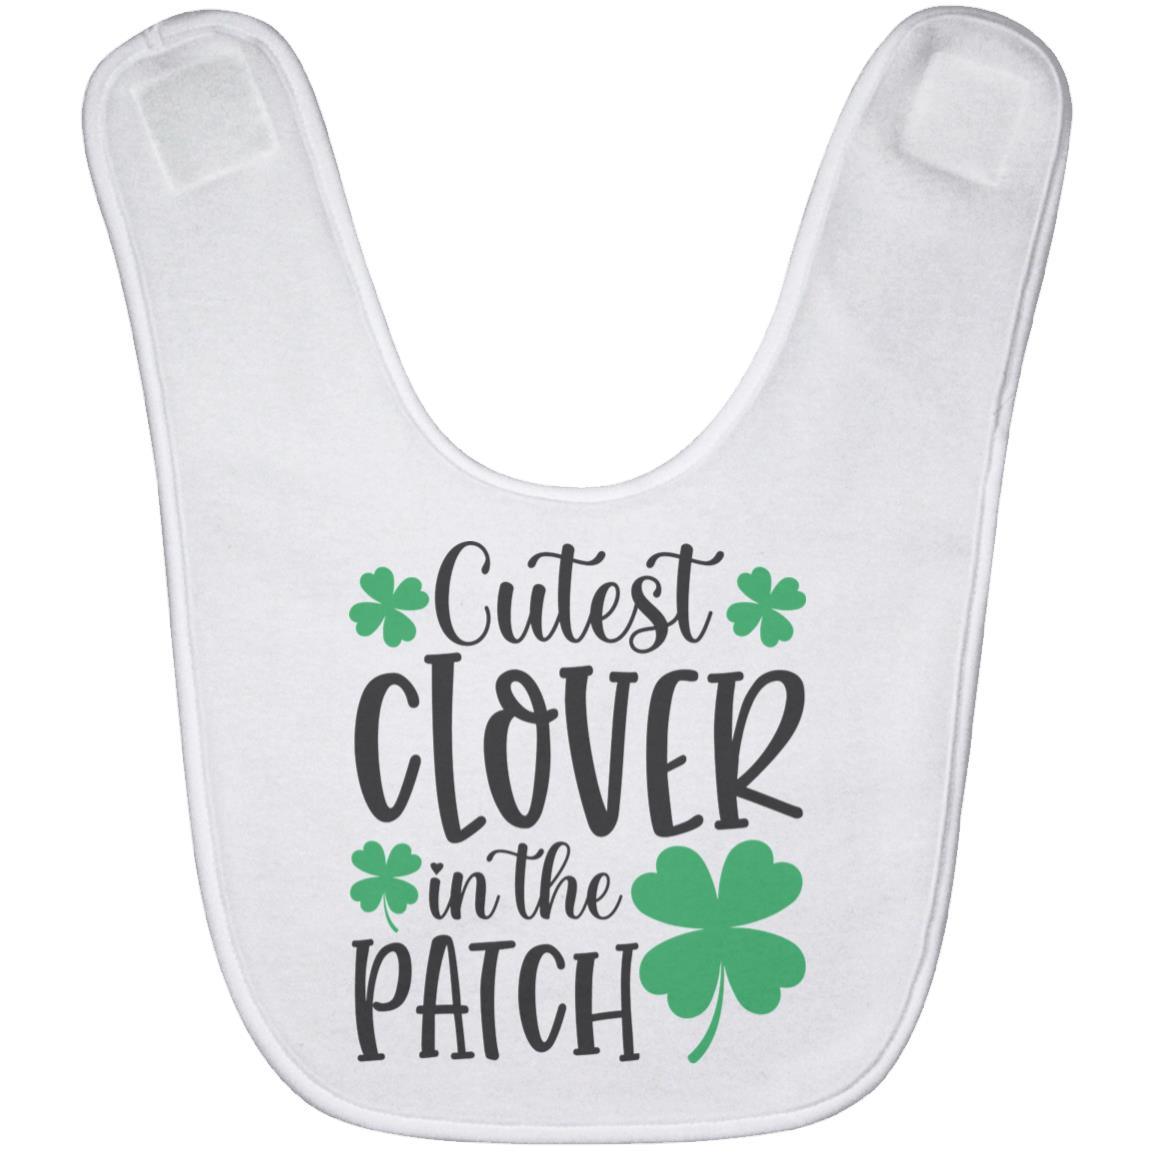 St. Patrick's Day Cutest Clover in the Patch Baby Bib - Mallard Moon Gift Shop